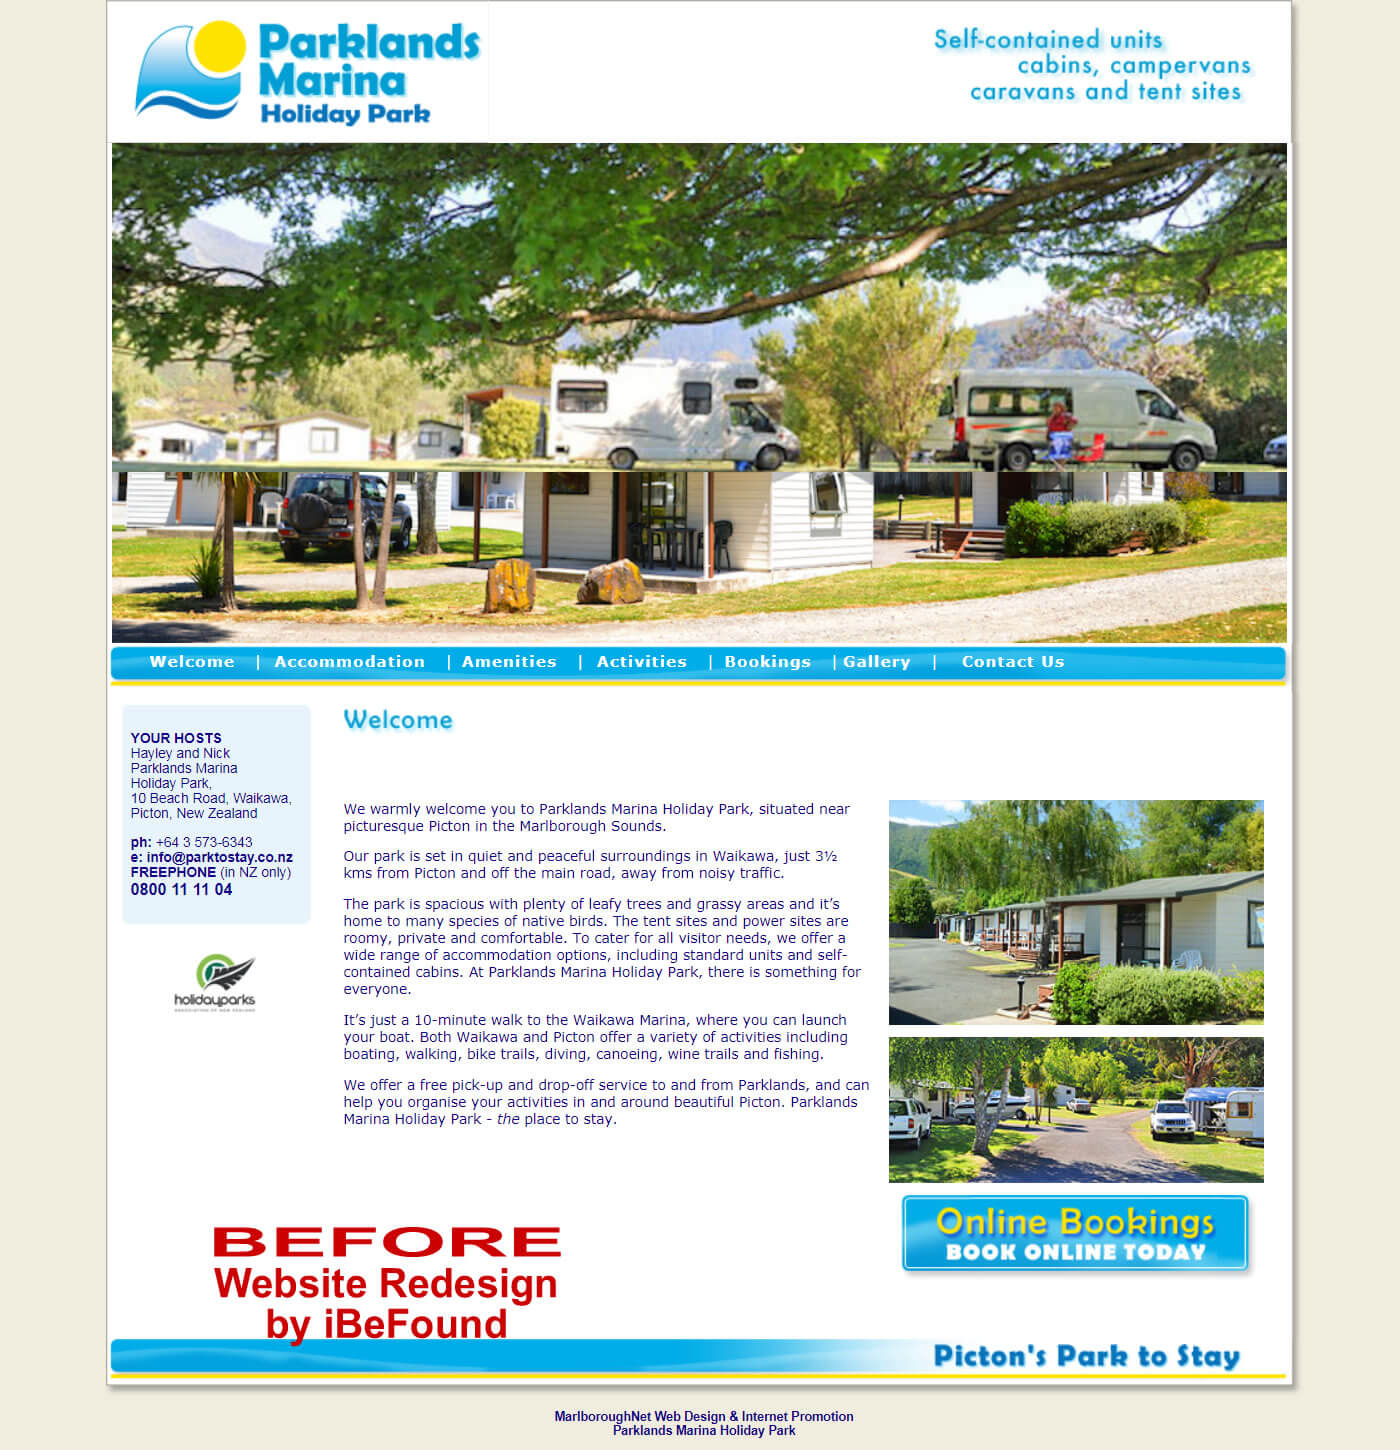 Homepage Of Parklands Marina Holiday Park In Picton Before Website Redesign By IBeFound